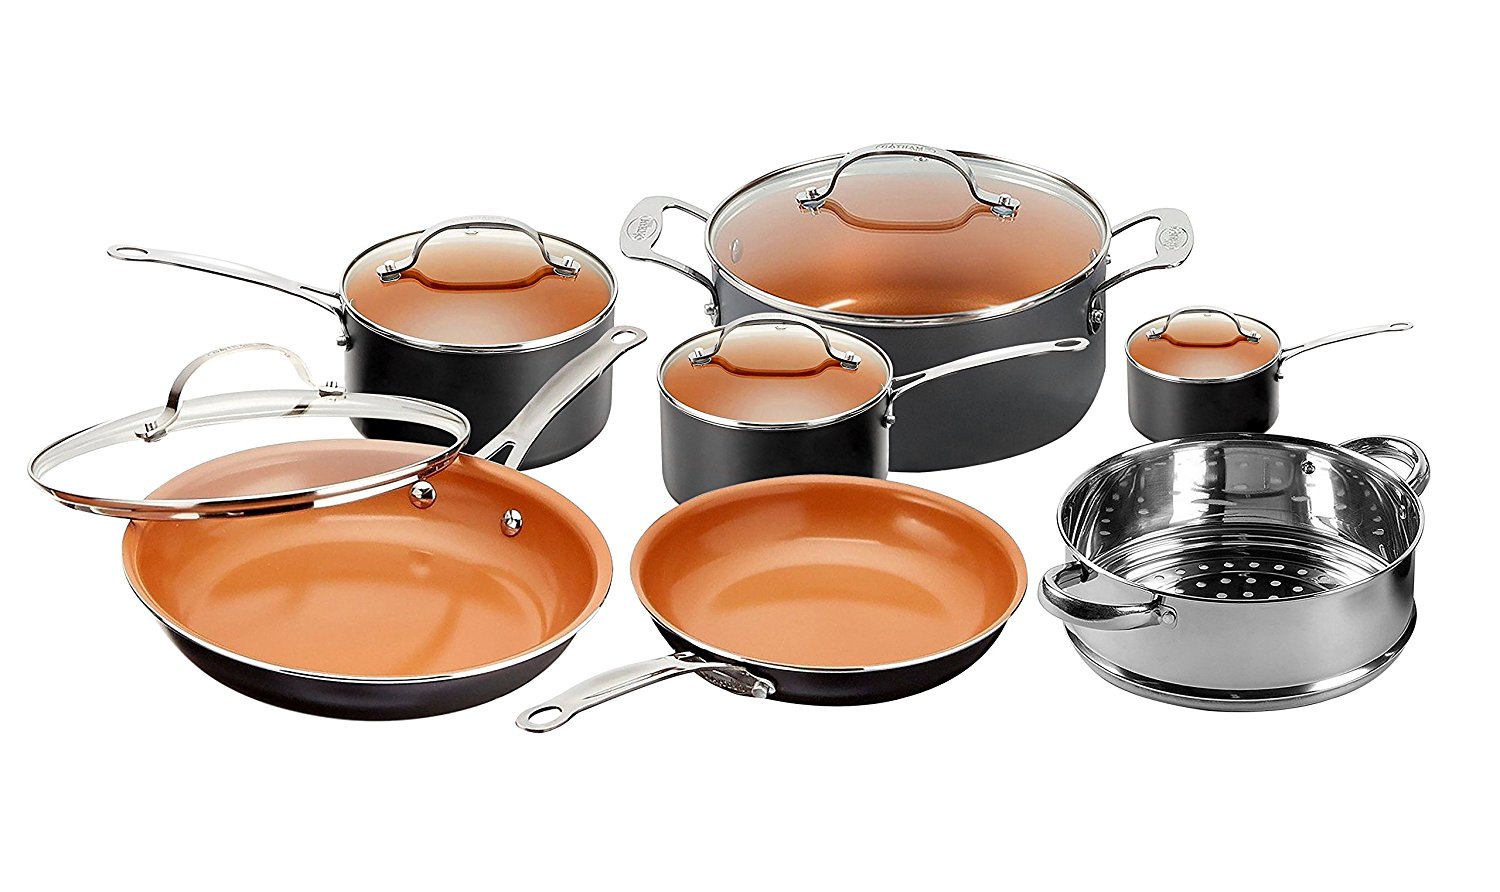 Save on Gotham Steel Nonstick Frying Pan and Cookware 12 pc Set – Just $89.99!